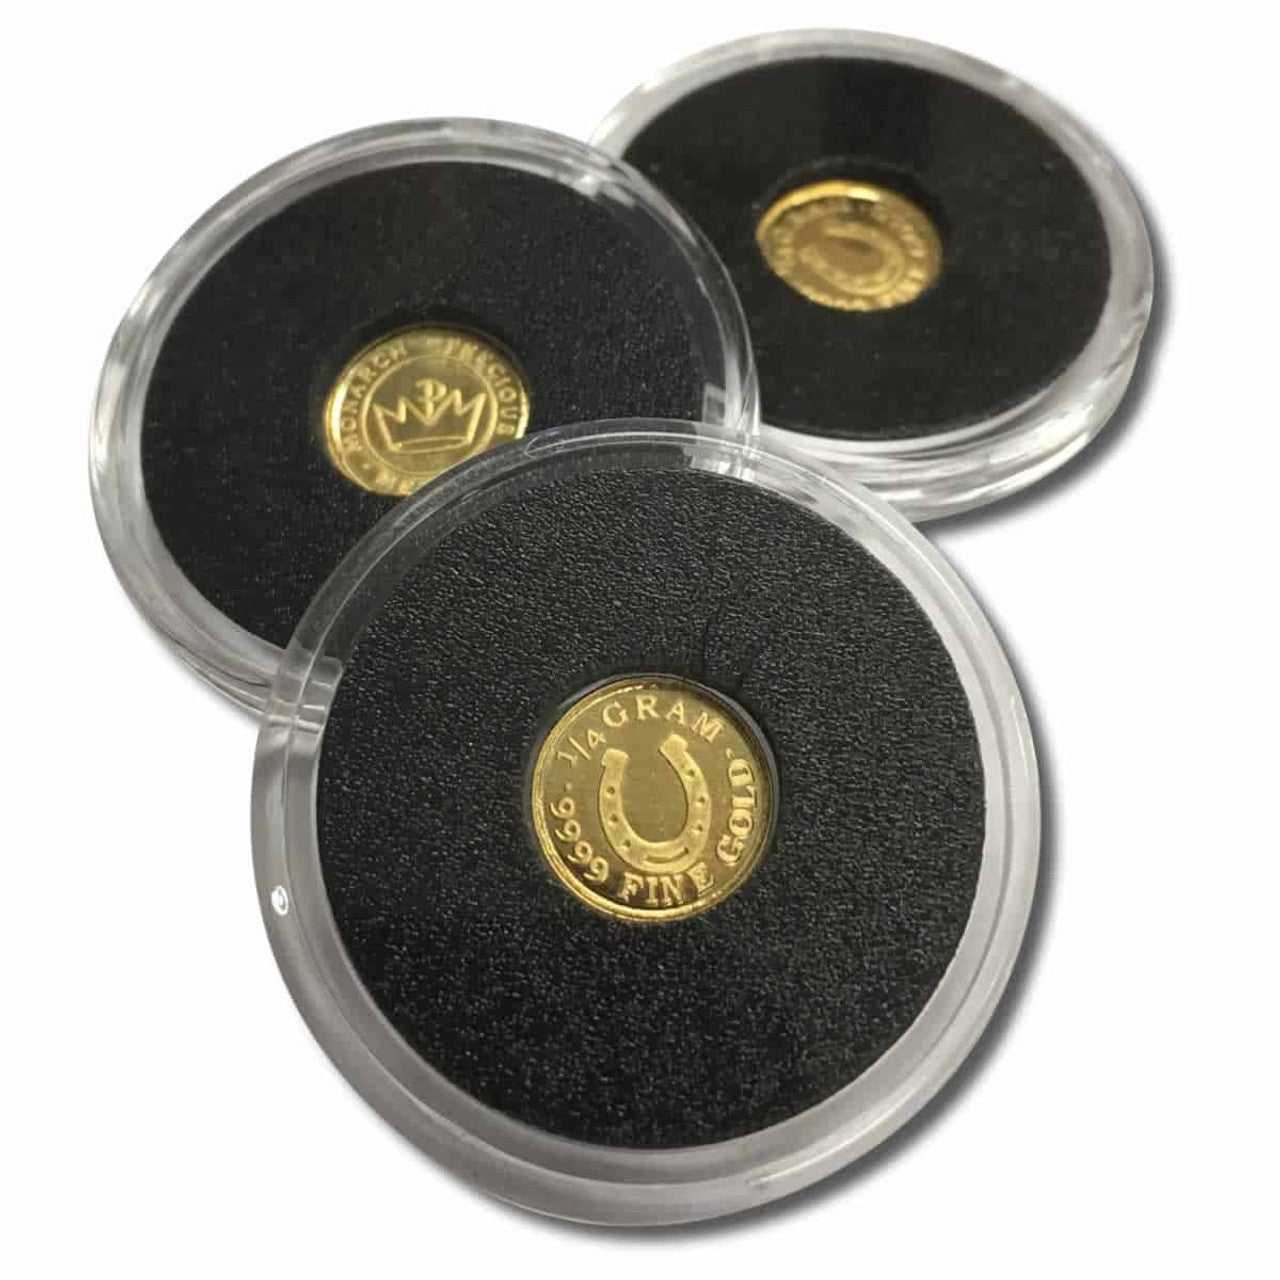 Pure GOLD .999 Bullion - Lucky Horseshoe - 1/4 gram round coin Sealed in Capsule